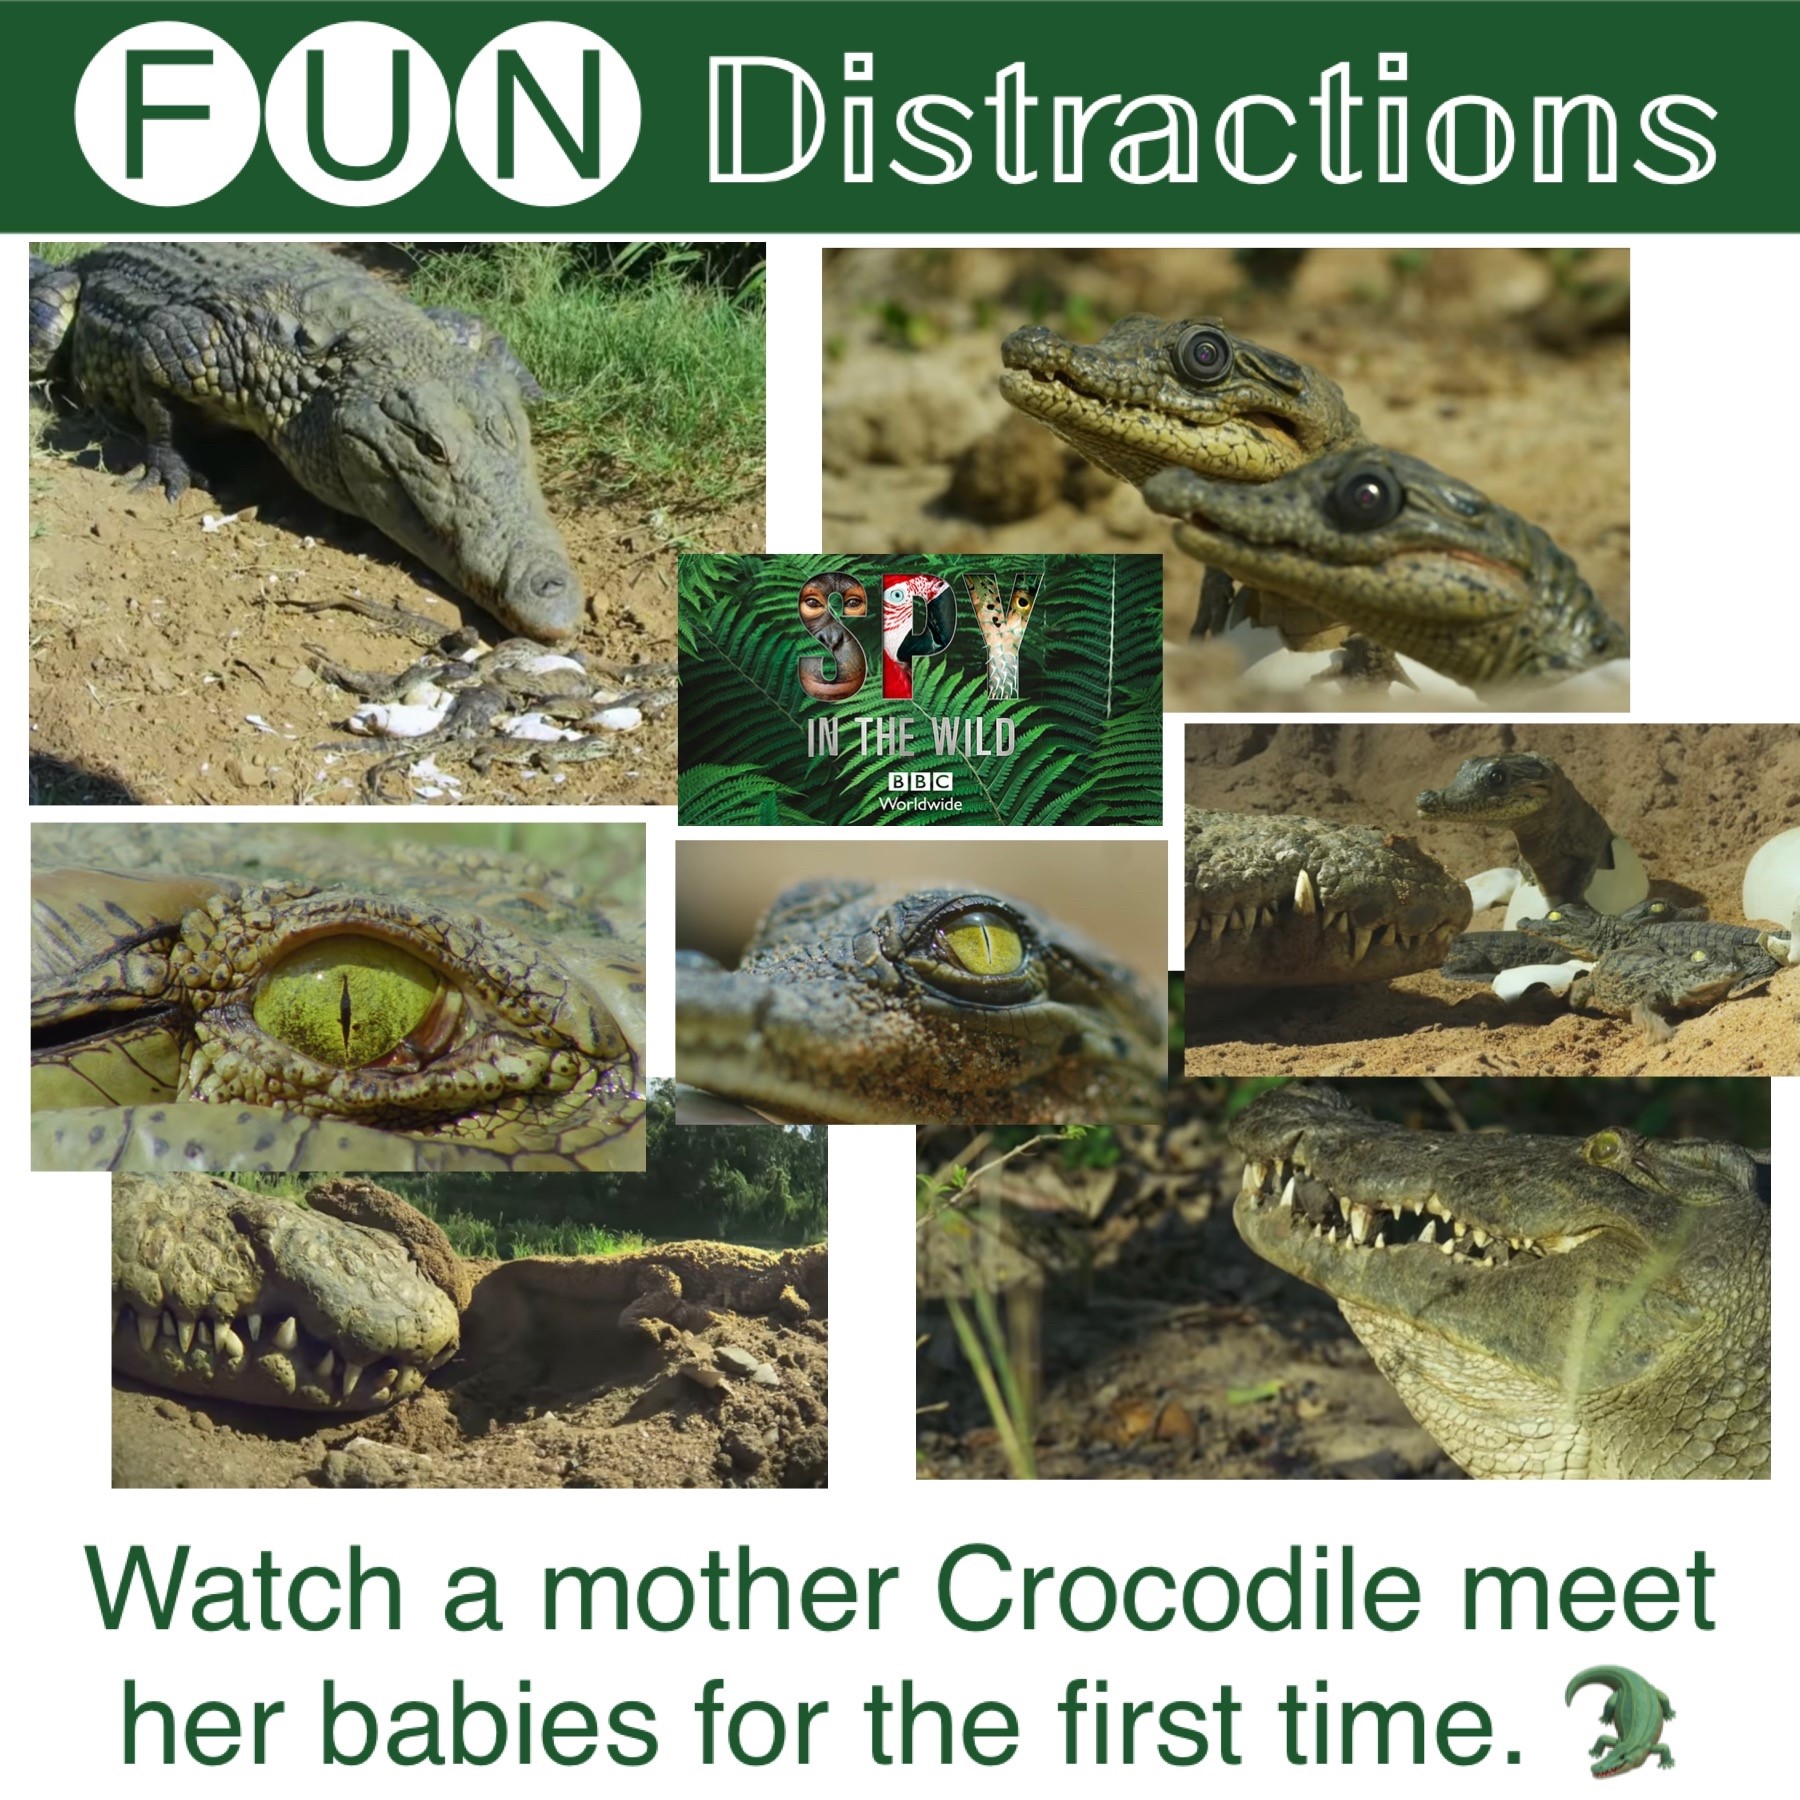 Image advertising the Library’s FUN Distractions series post about mother crocodiles